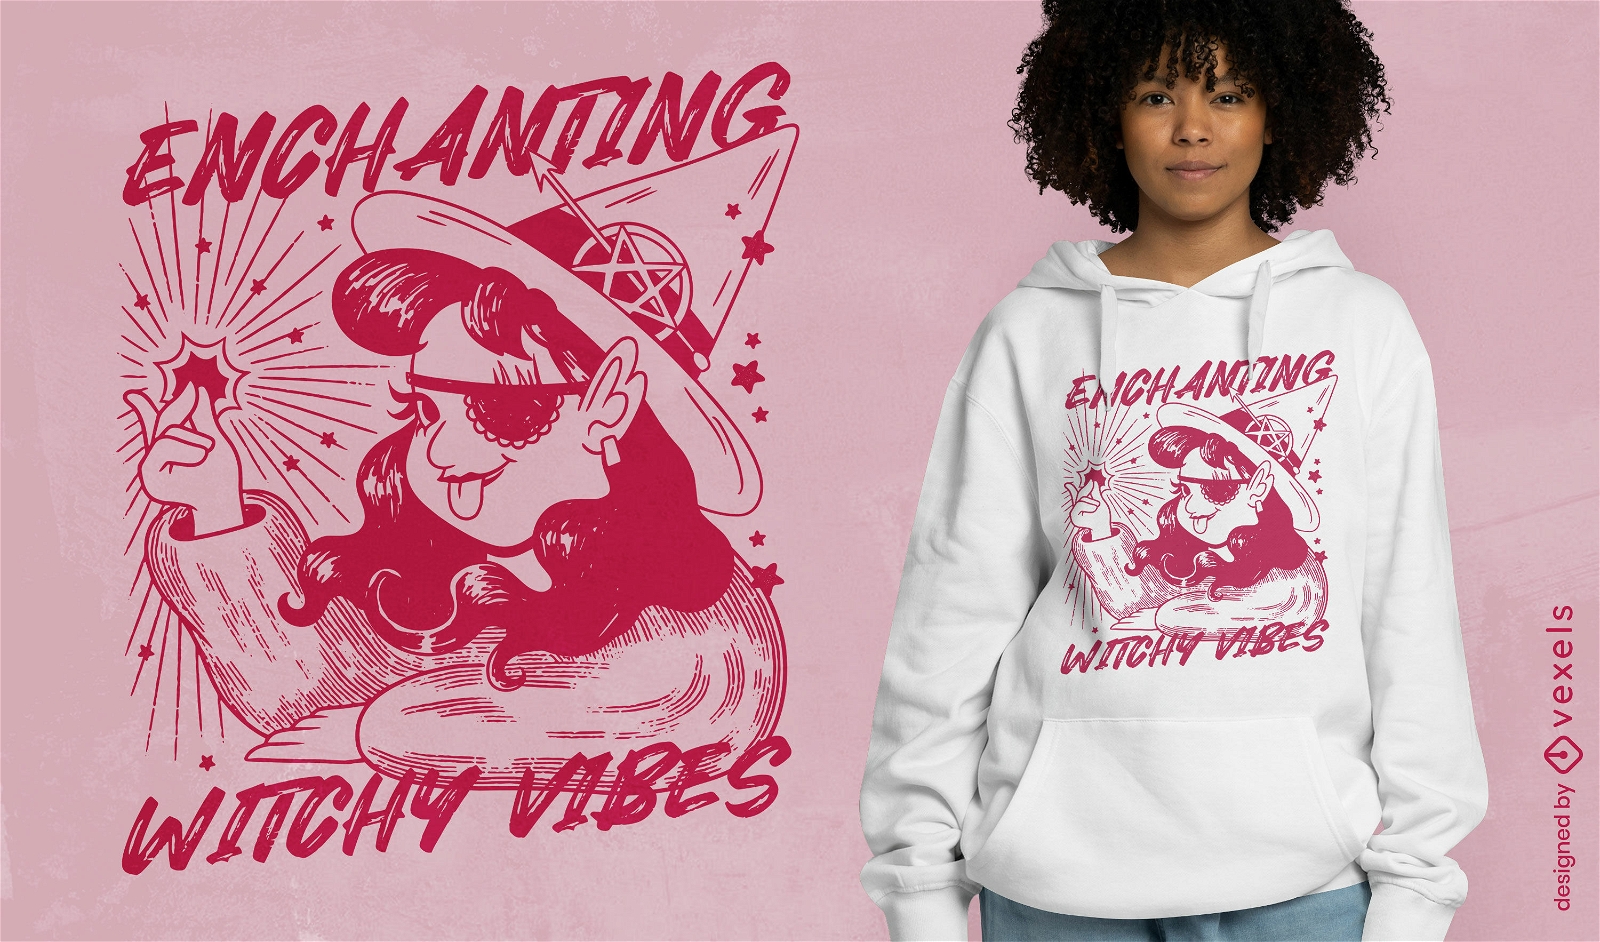 Enchanting witchy vibes t-shirt design